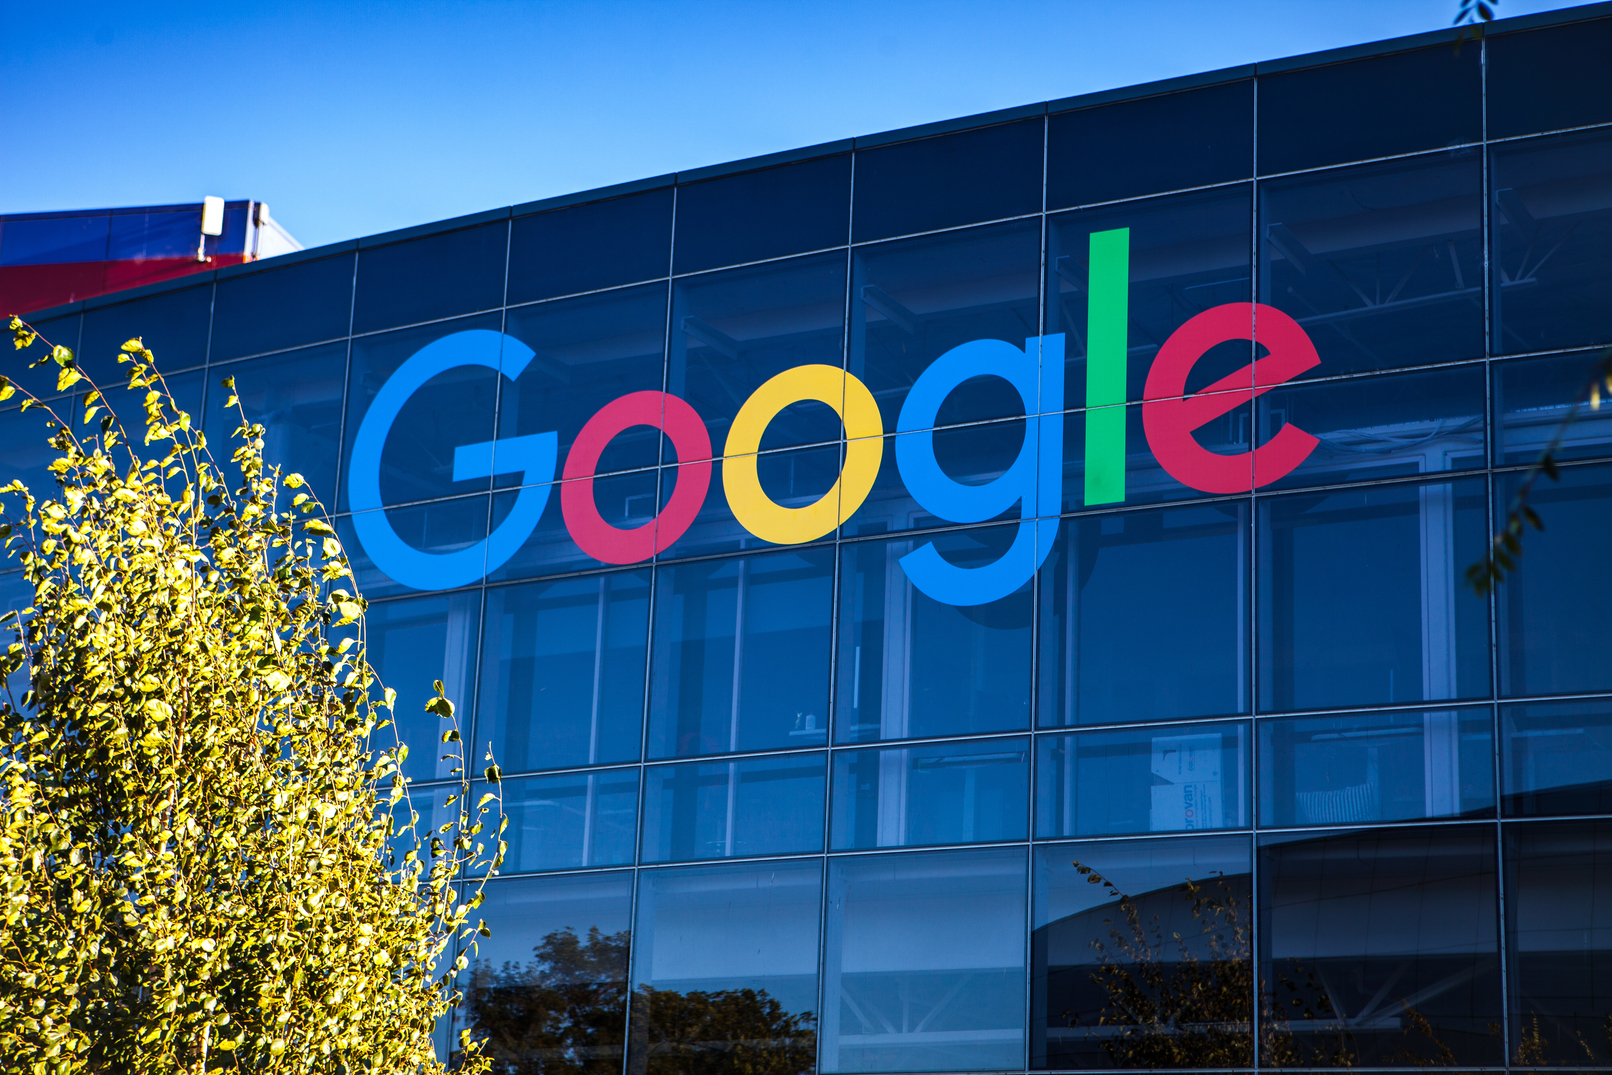 Google Employees No Longer Restricted to Arbitration for Legal Disputes Starting March 21